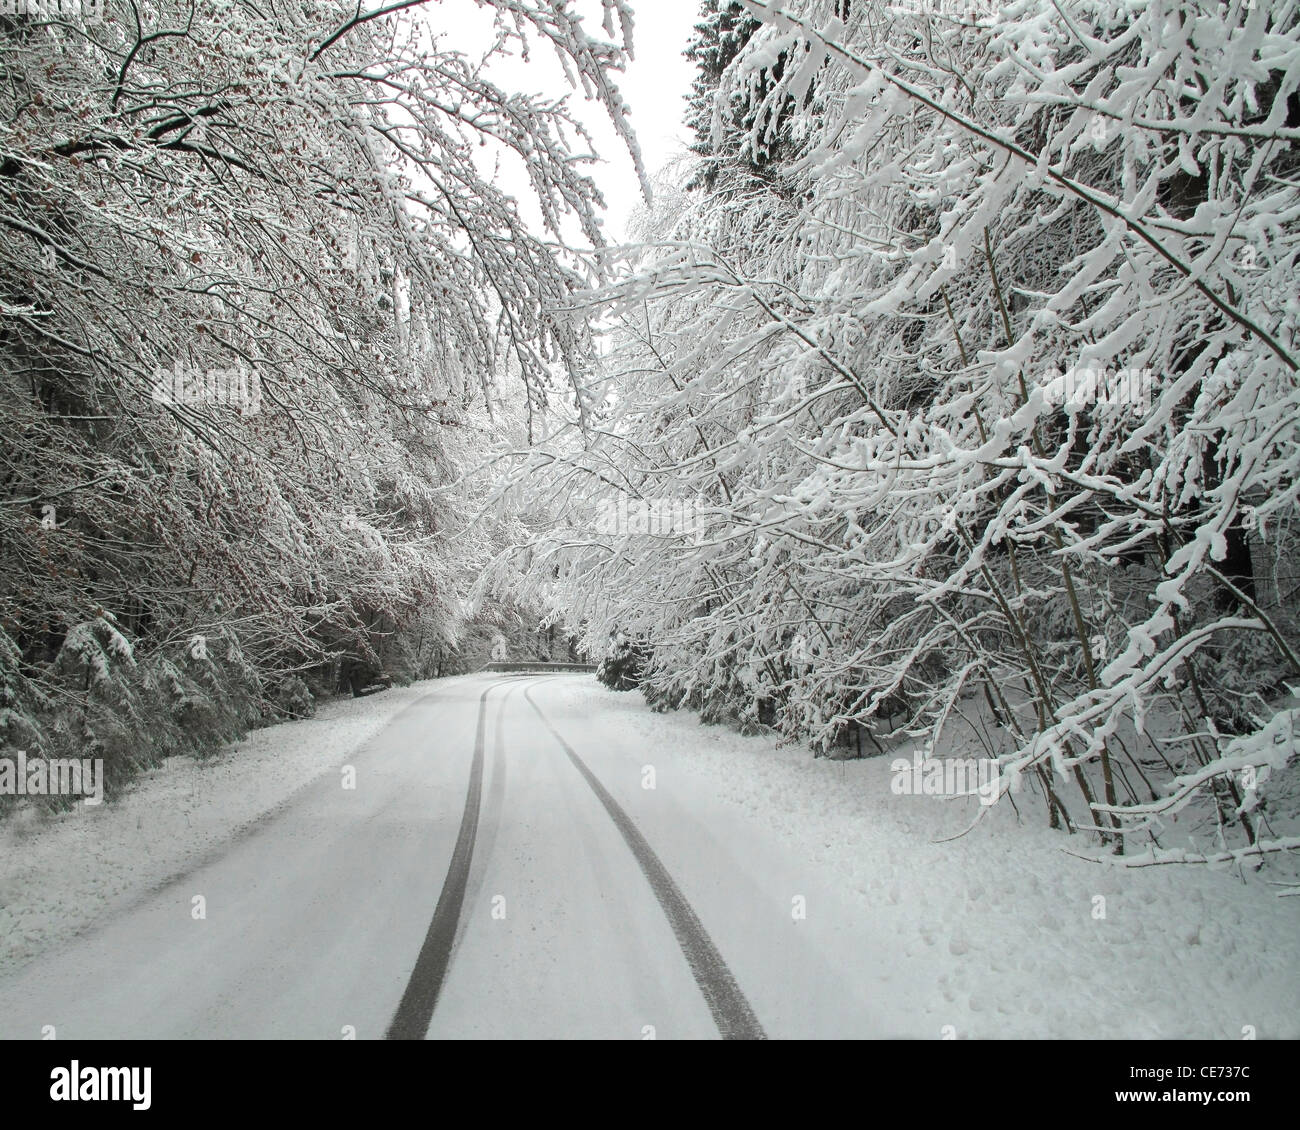 DE - BAVARIA: Driving in wintry conditions Stock Photo